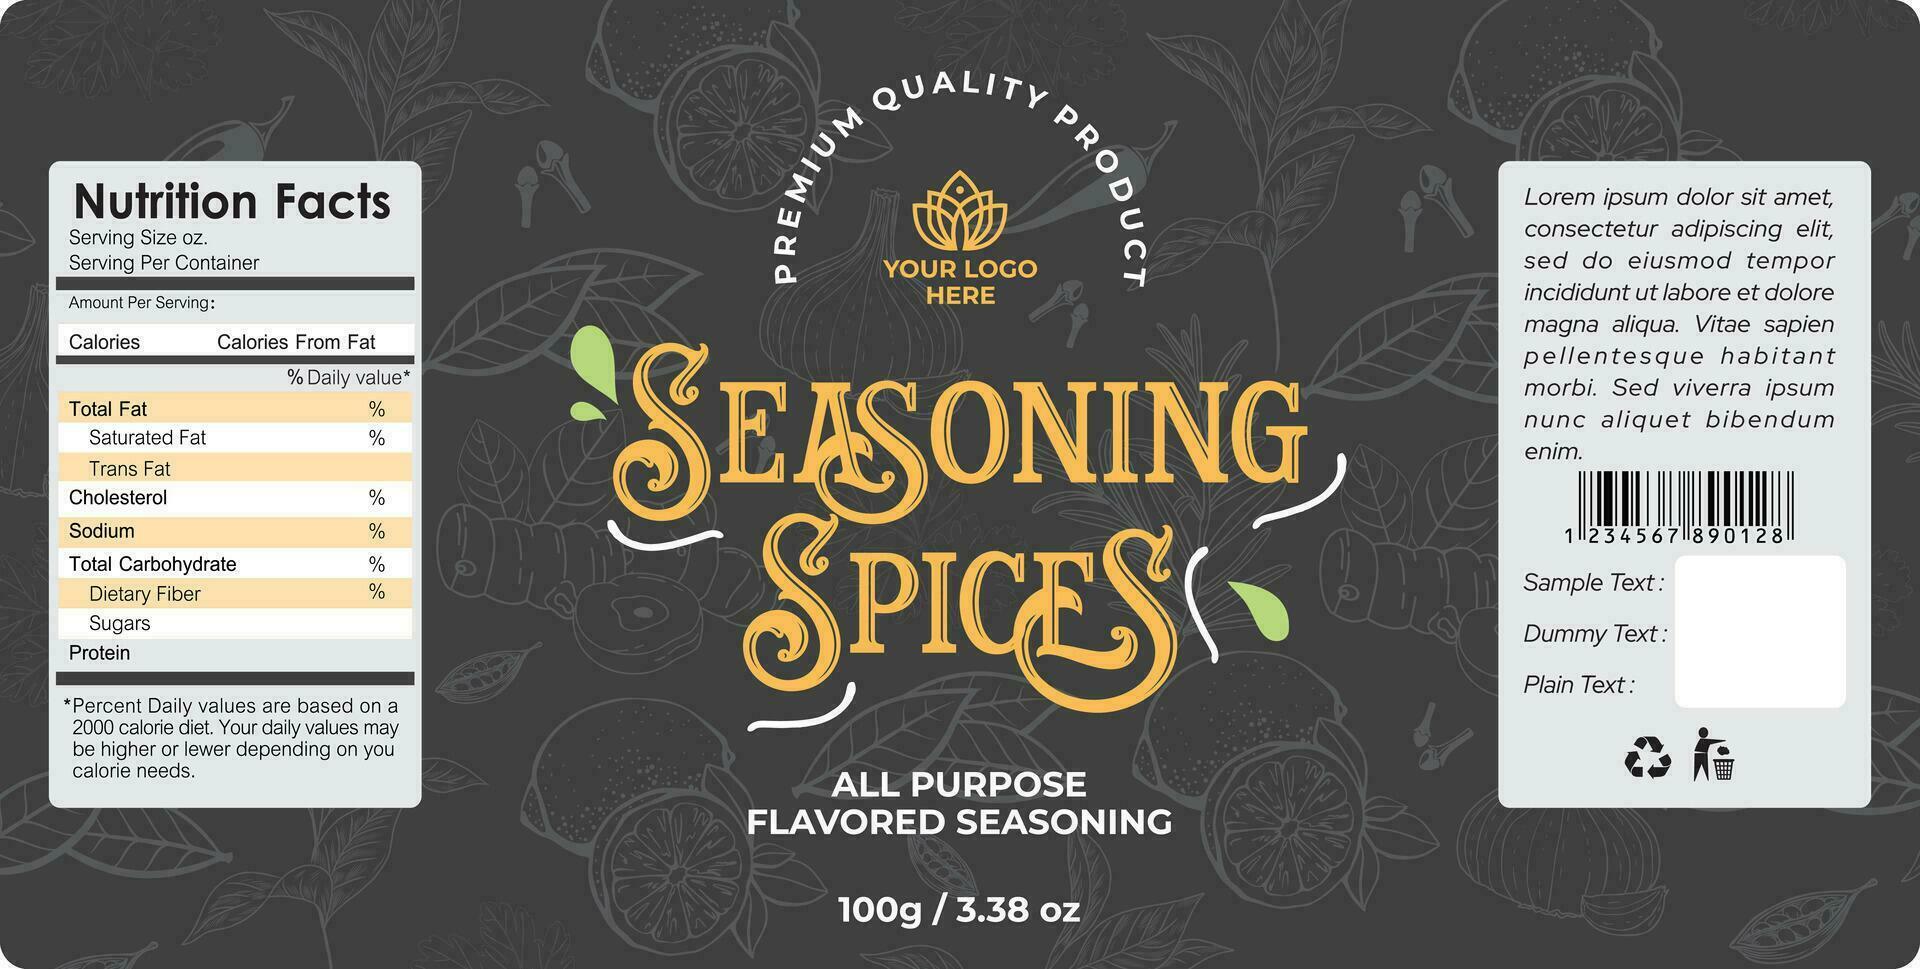 Spice Label Design Template. Seasoning herbs and spice packaging Design. Lemon, Cardamom, Garlic, pepper and mint organic spices product vector illustration. Luxury Spice Seasoning Jar Label Design